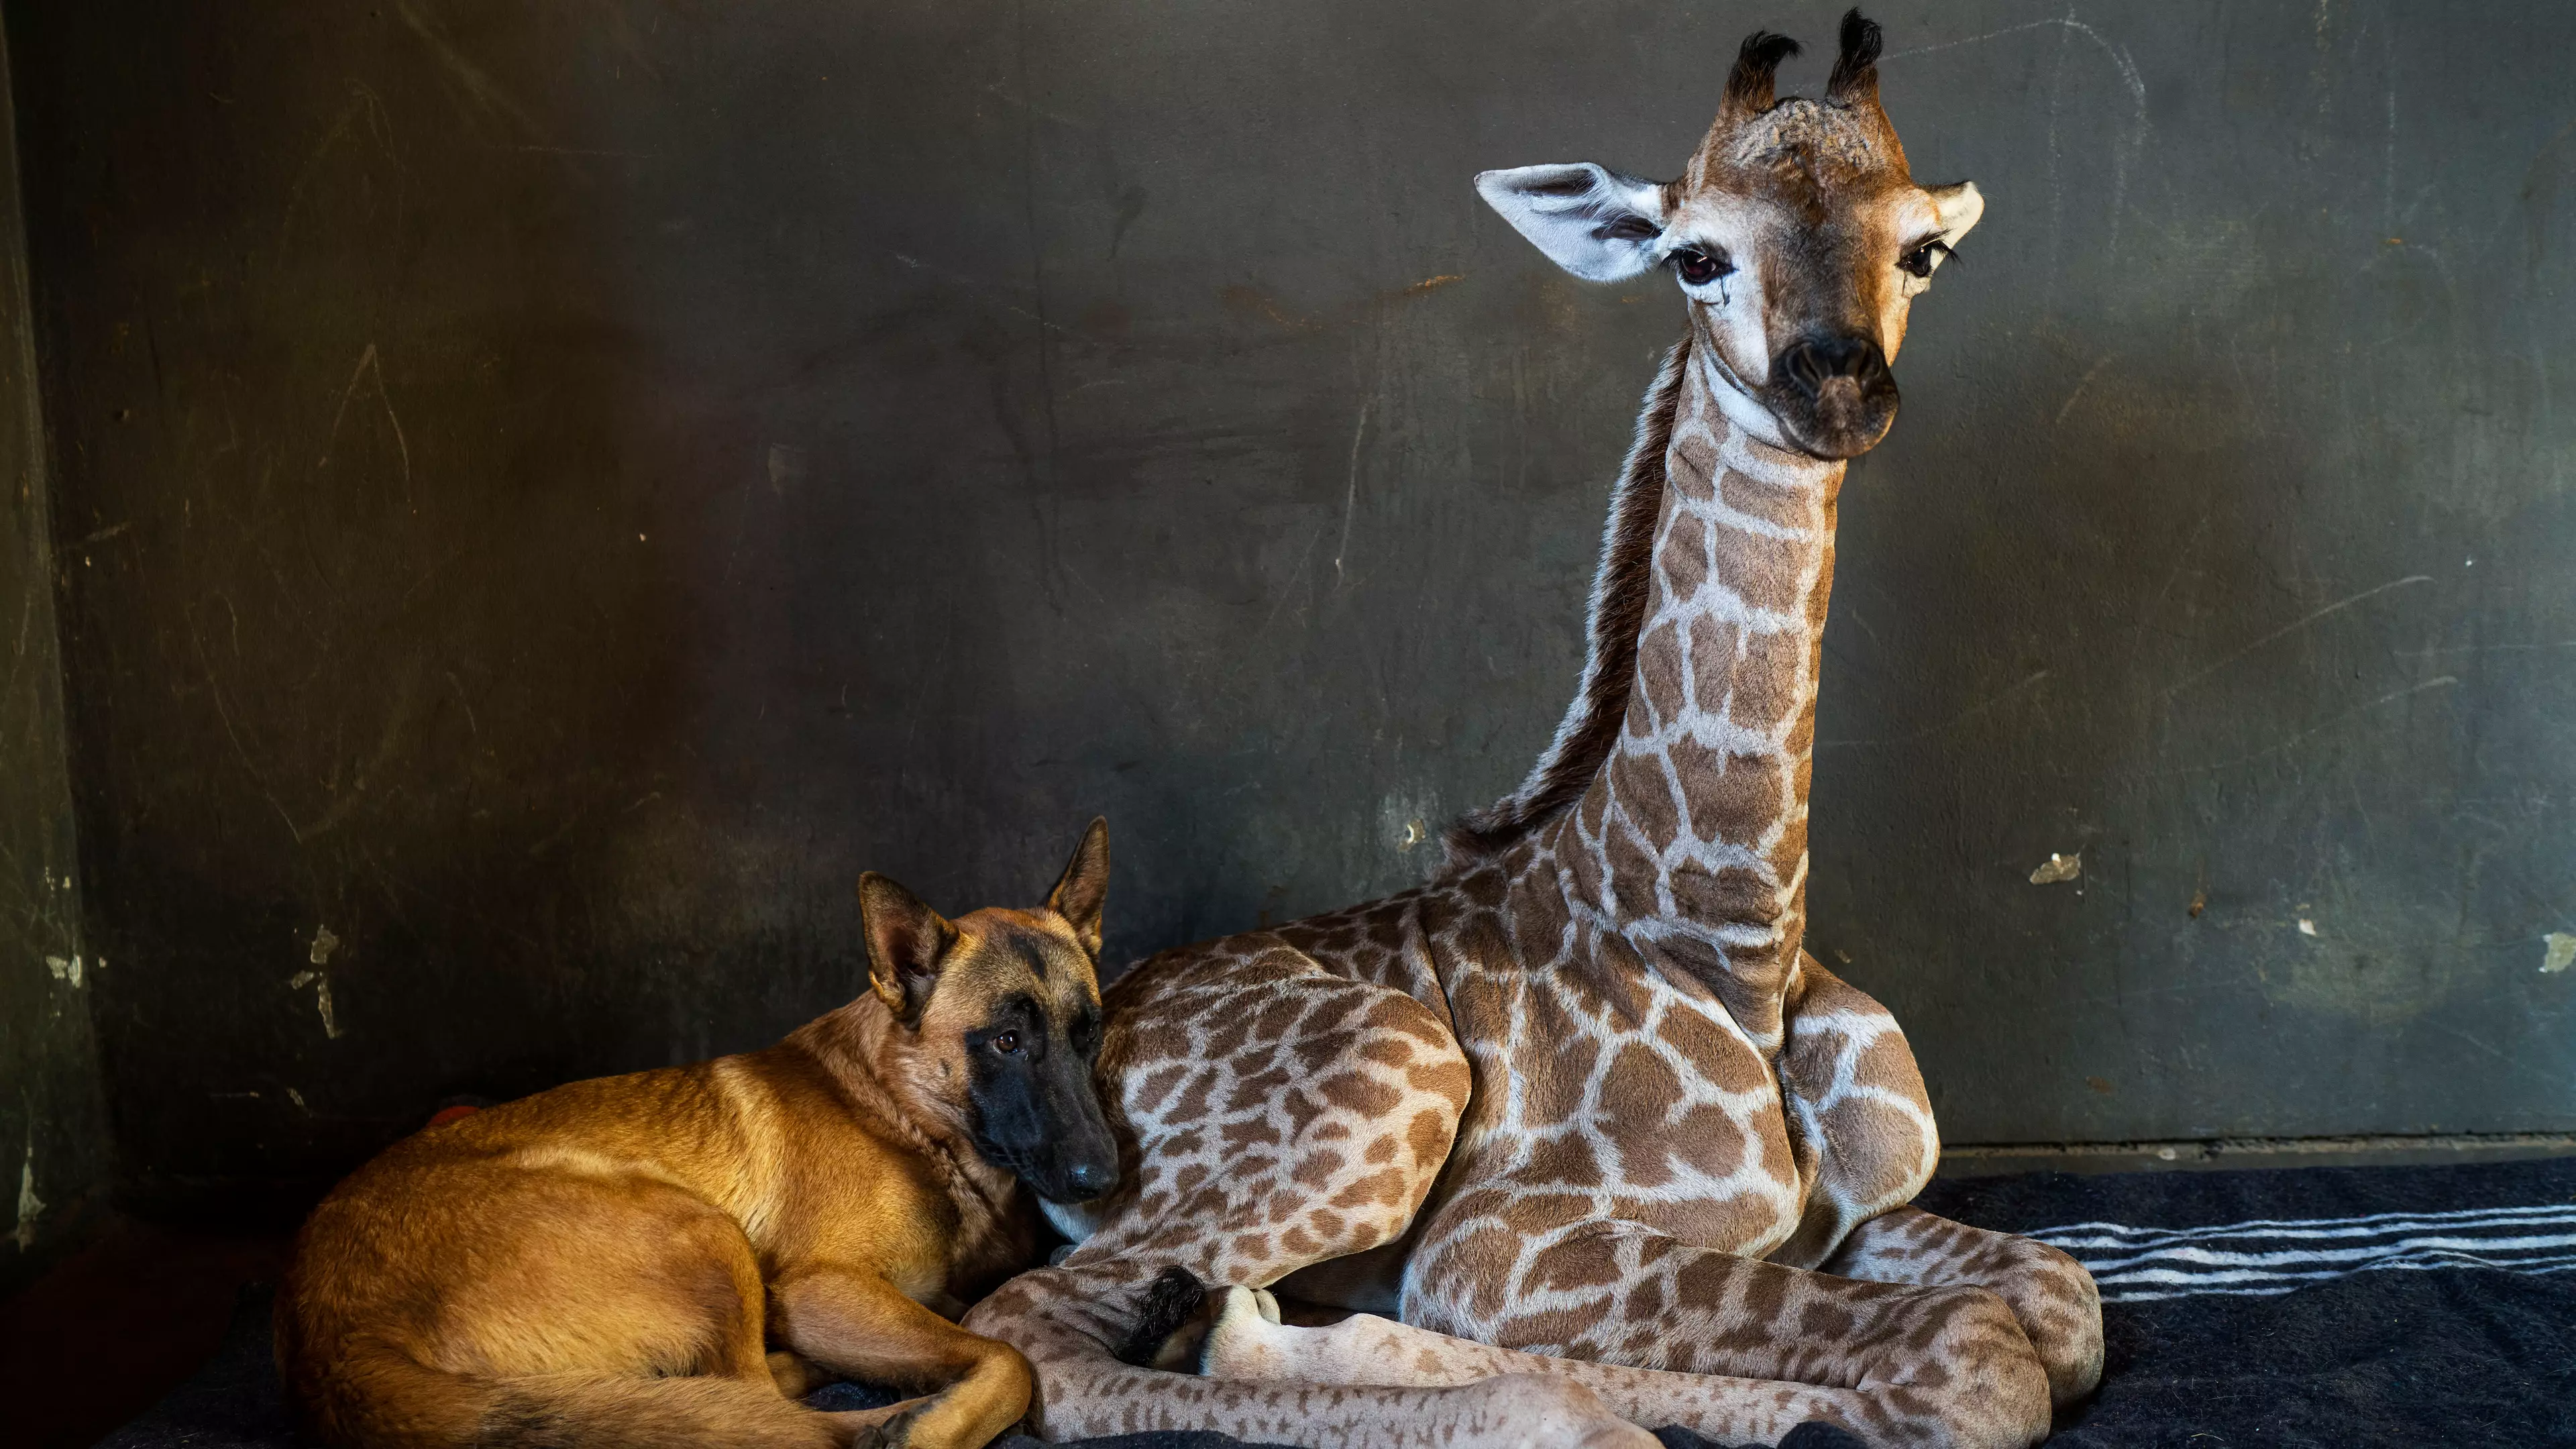 Jazz The Orphaned Baby Giraffe Who Made Best Friends With A Dog Has Died